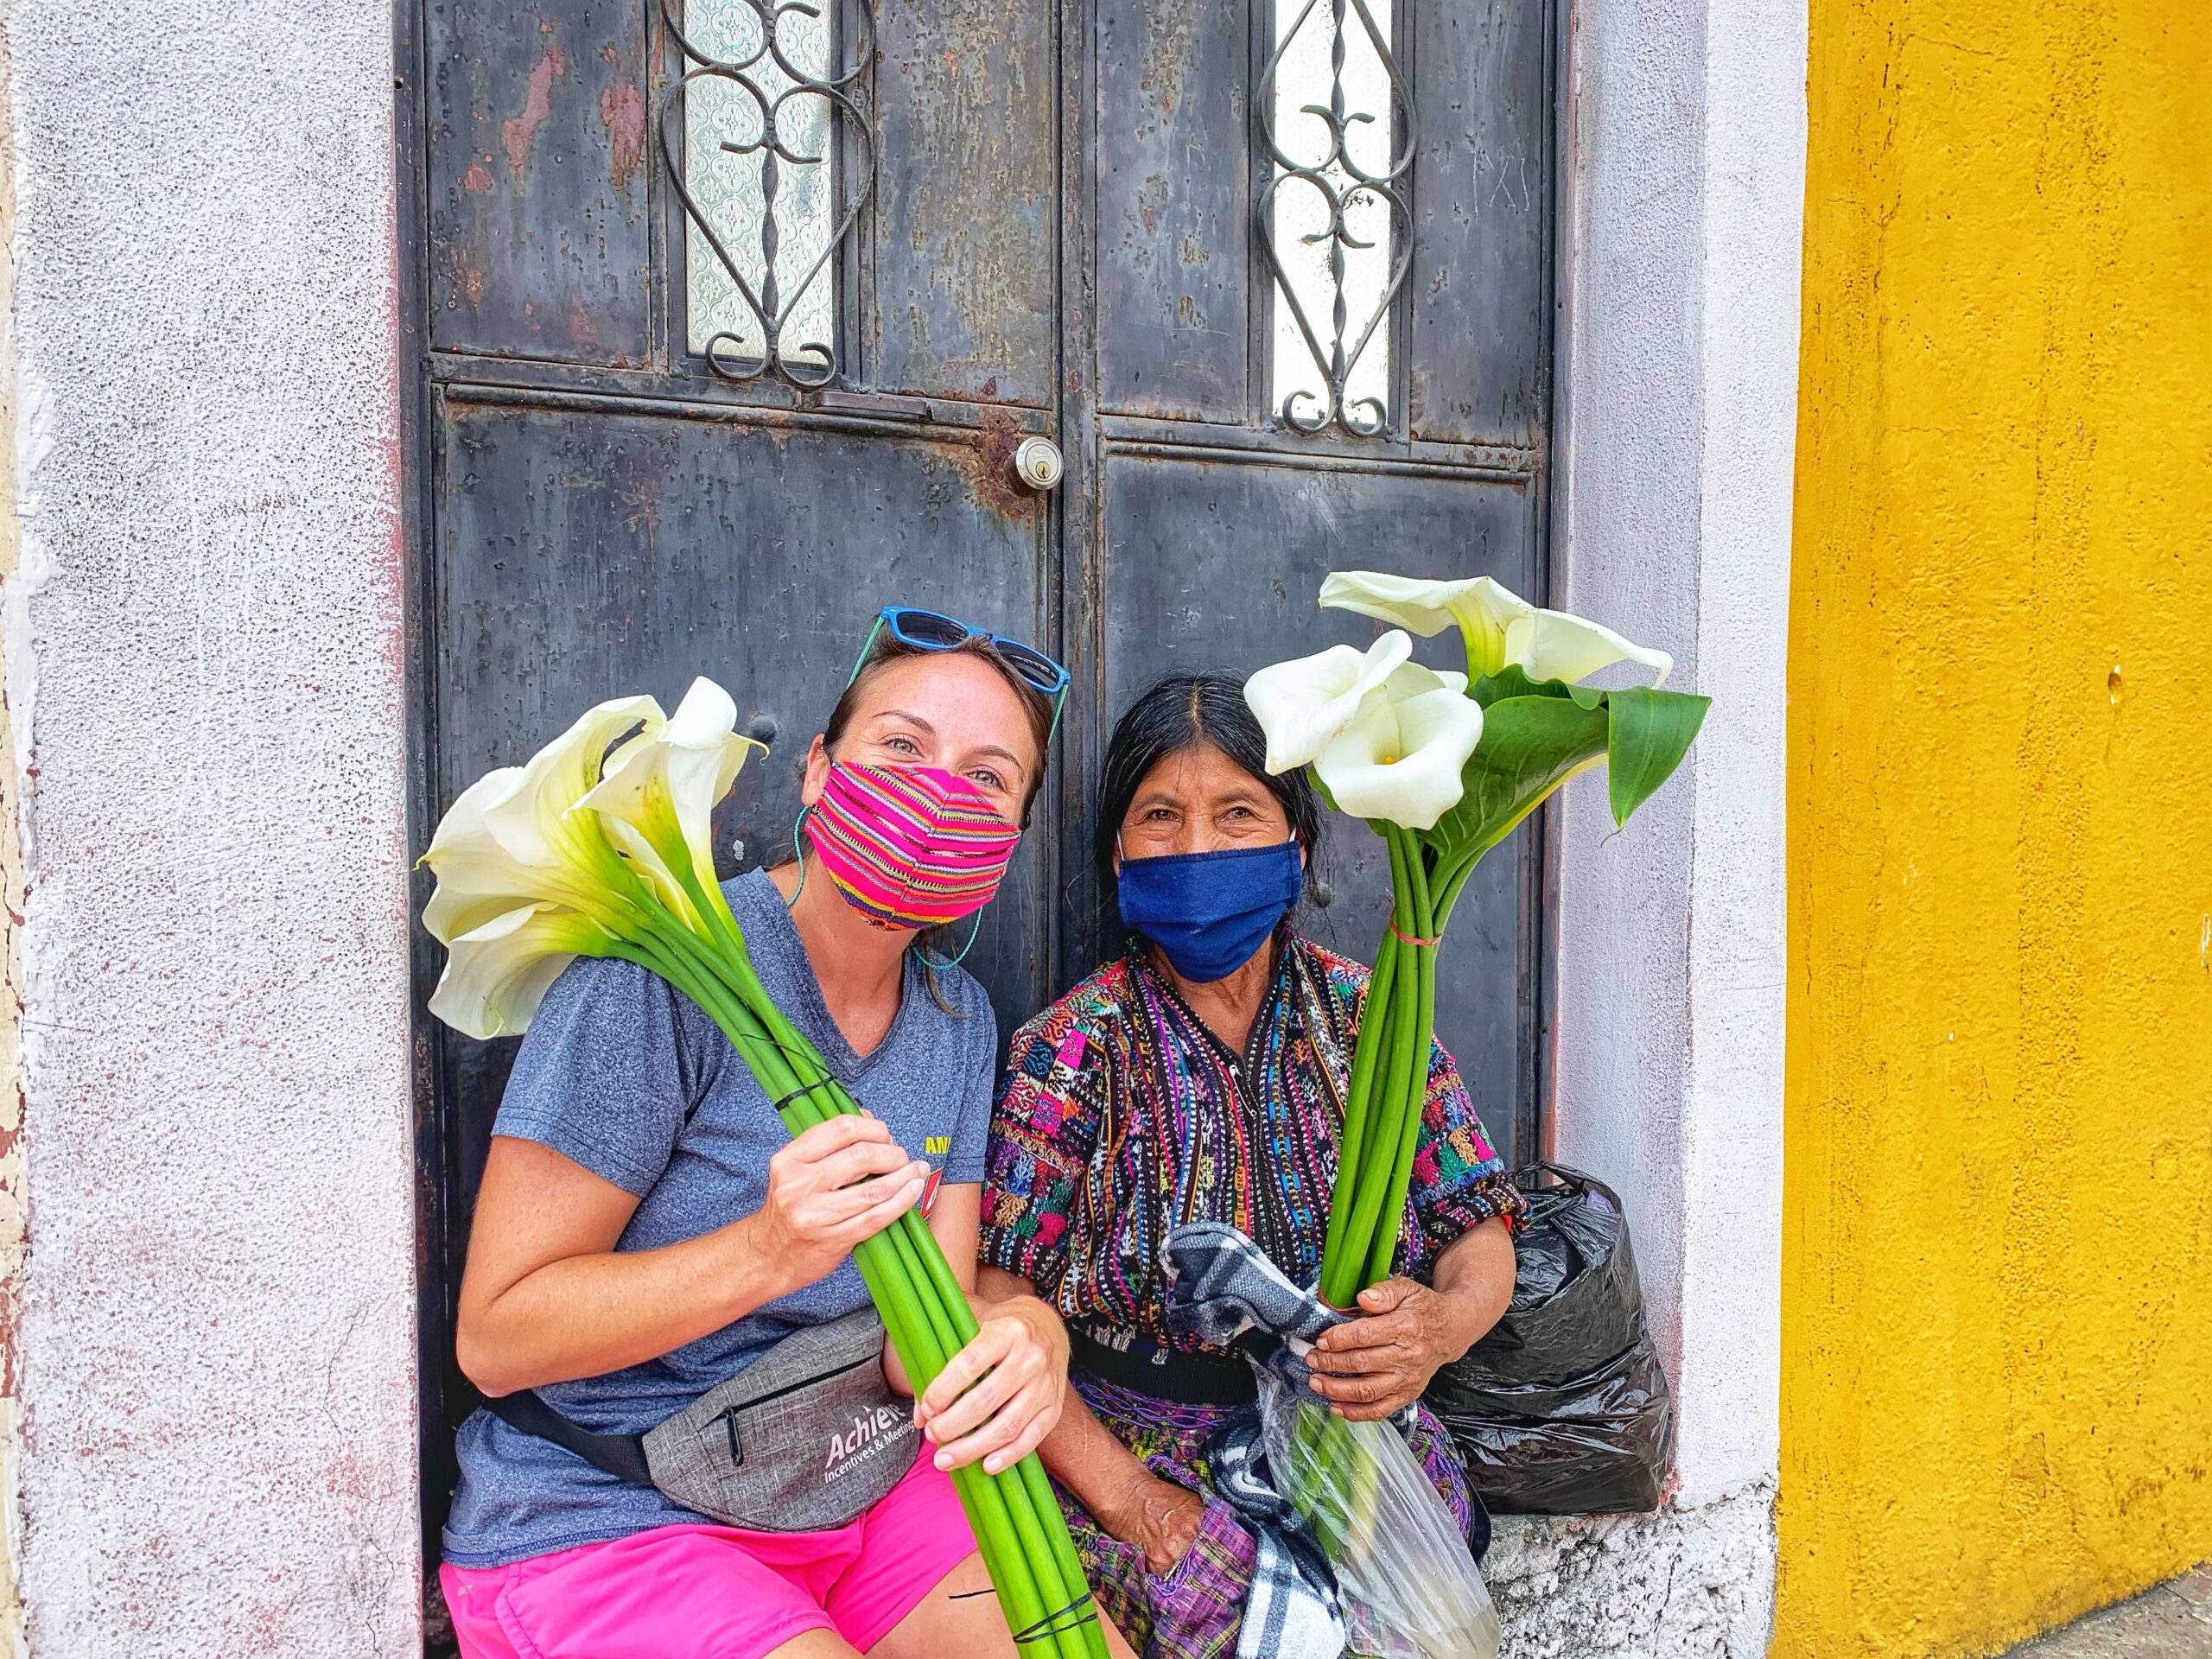 Ashley Lawson posing with a Guatemalan woman on a doorstep. They are both holding large Cala lillies